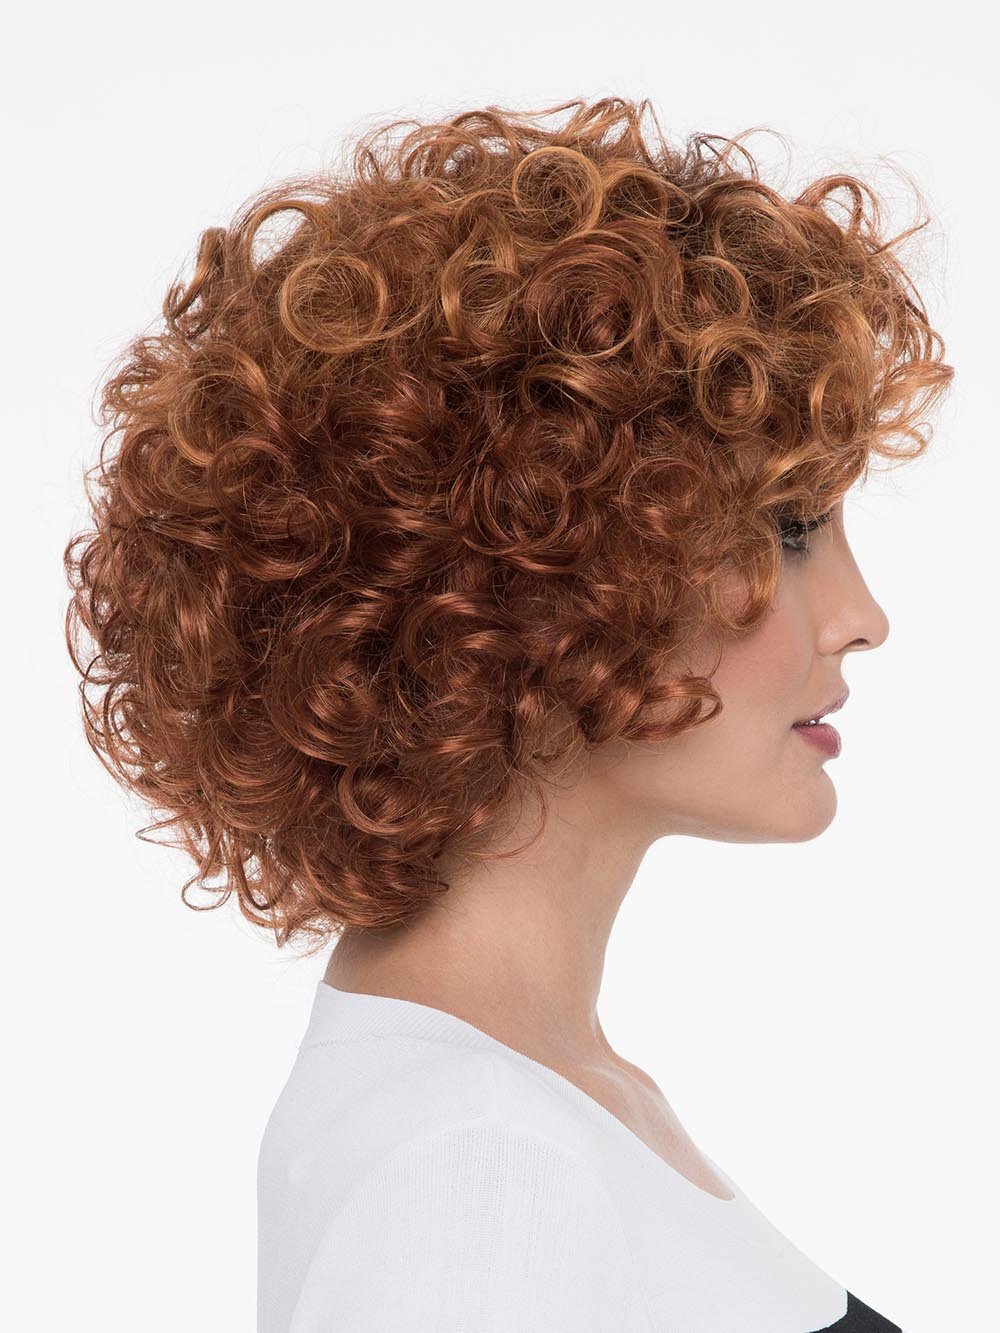 With a full head of bouncy curls, Kenya Wig by Envy has chin-length 'do gives you volume for days